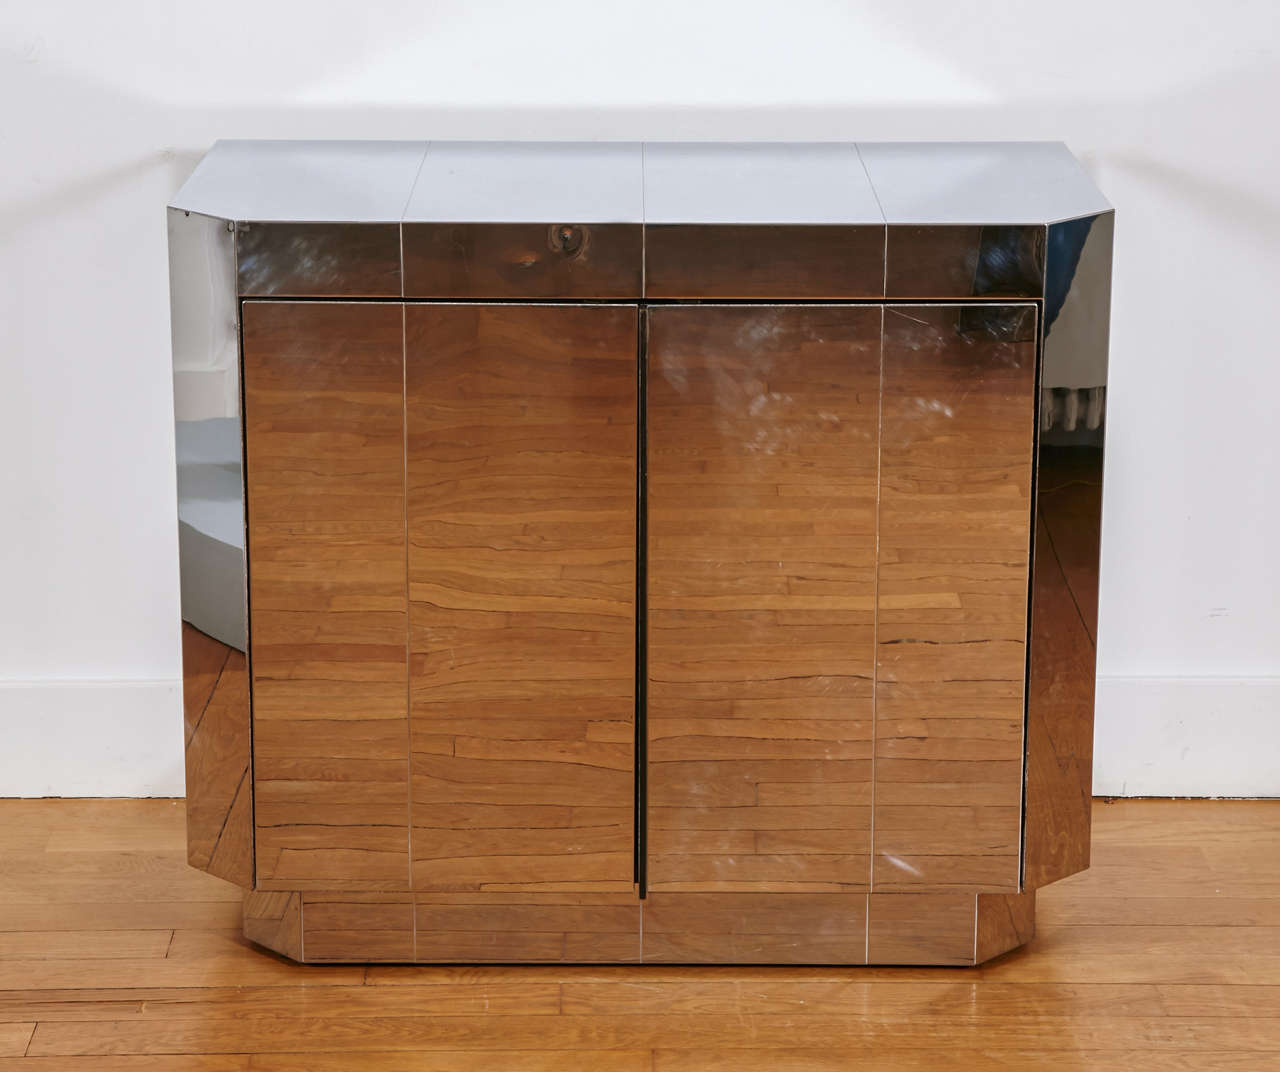 Cityscape cabinet, 1970’s, by Paul EVANS (USA, 1931-1987
Geometrical chromed steel plated work on wood structure. 
Opening with two doors on a black inside with shelf. 
Canted jambs. Plinth. Black back.
